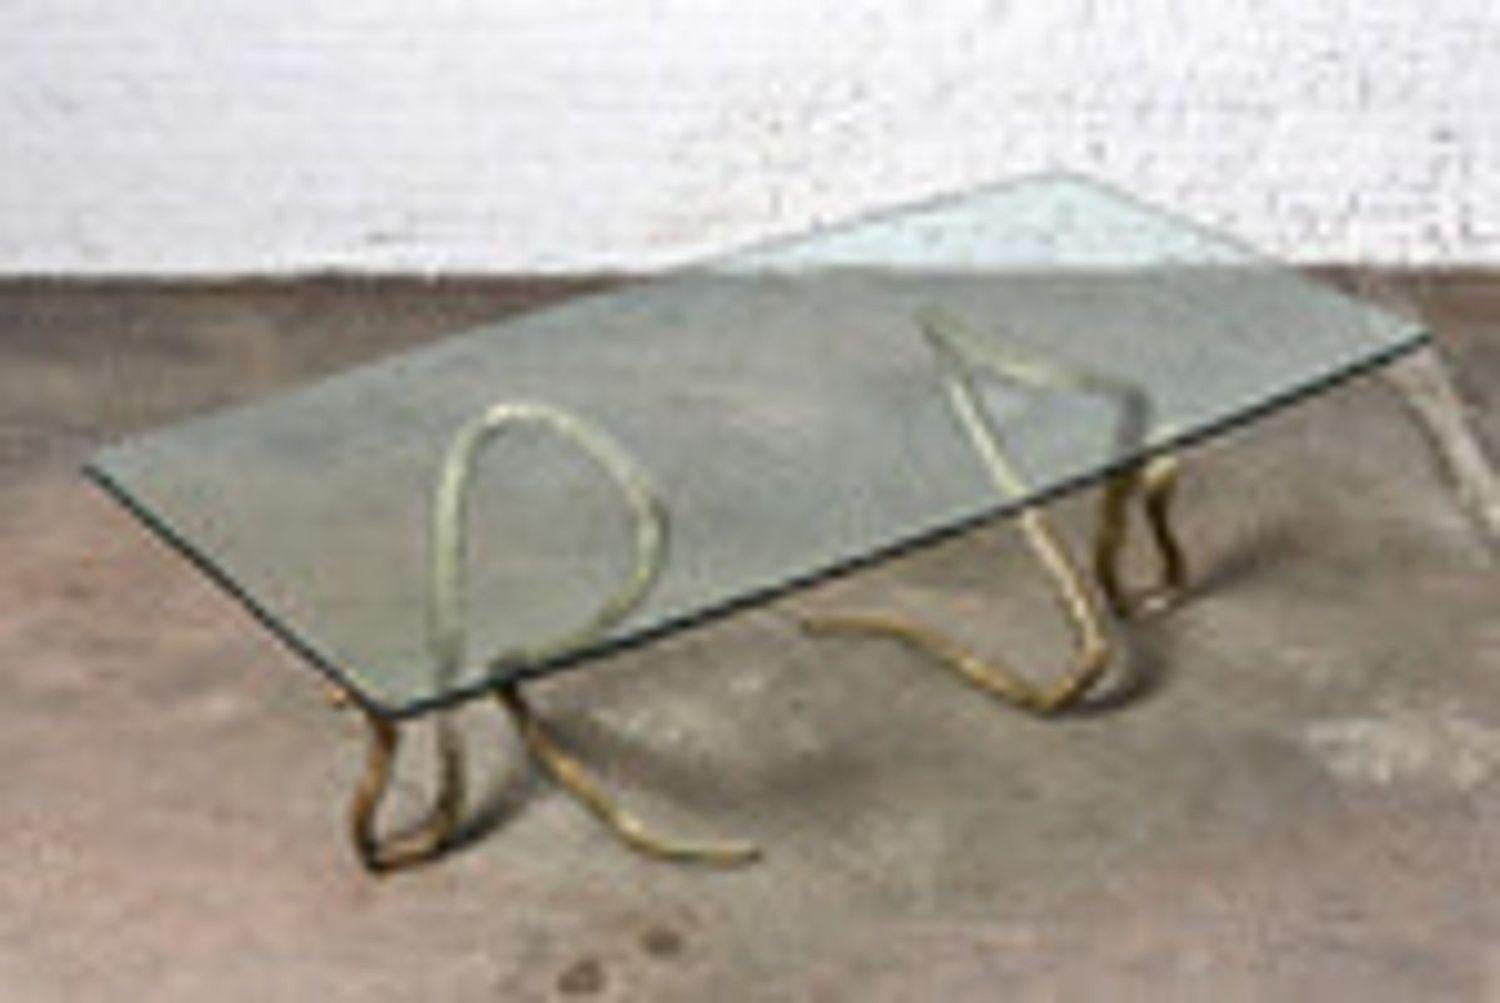 ELODIA Sculptural Brass Cobra and Glass Dining Table. Beautiful patina to brass serpent snake bases. Glass top has a multifaceted/polished chip edge, which increases its ability to reflect light. The play on light is gem like. Signed “ELODIA”.